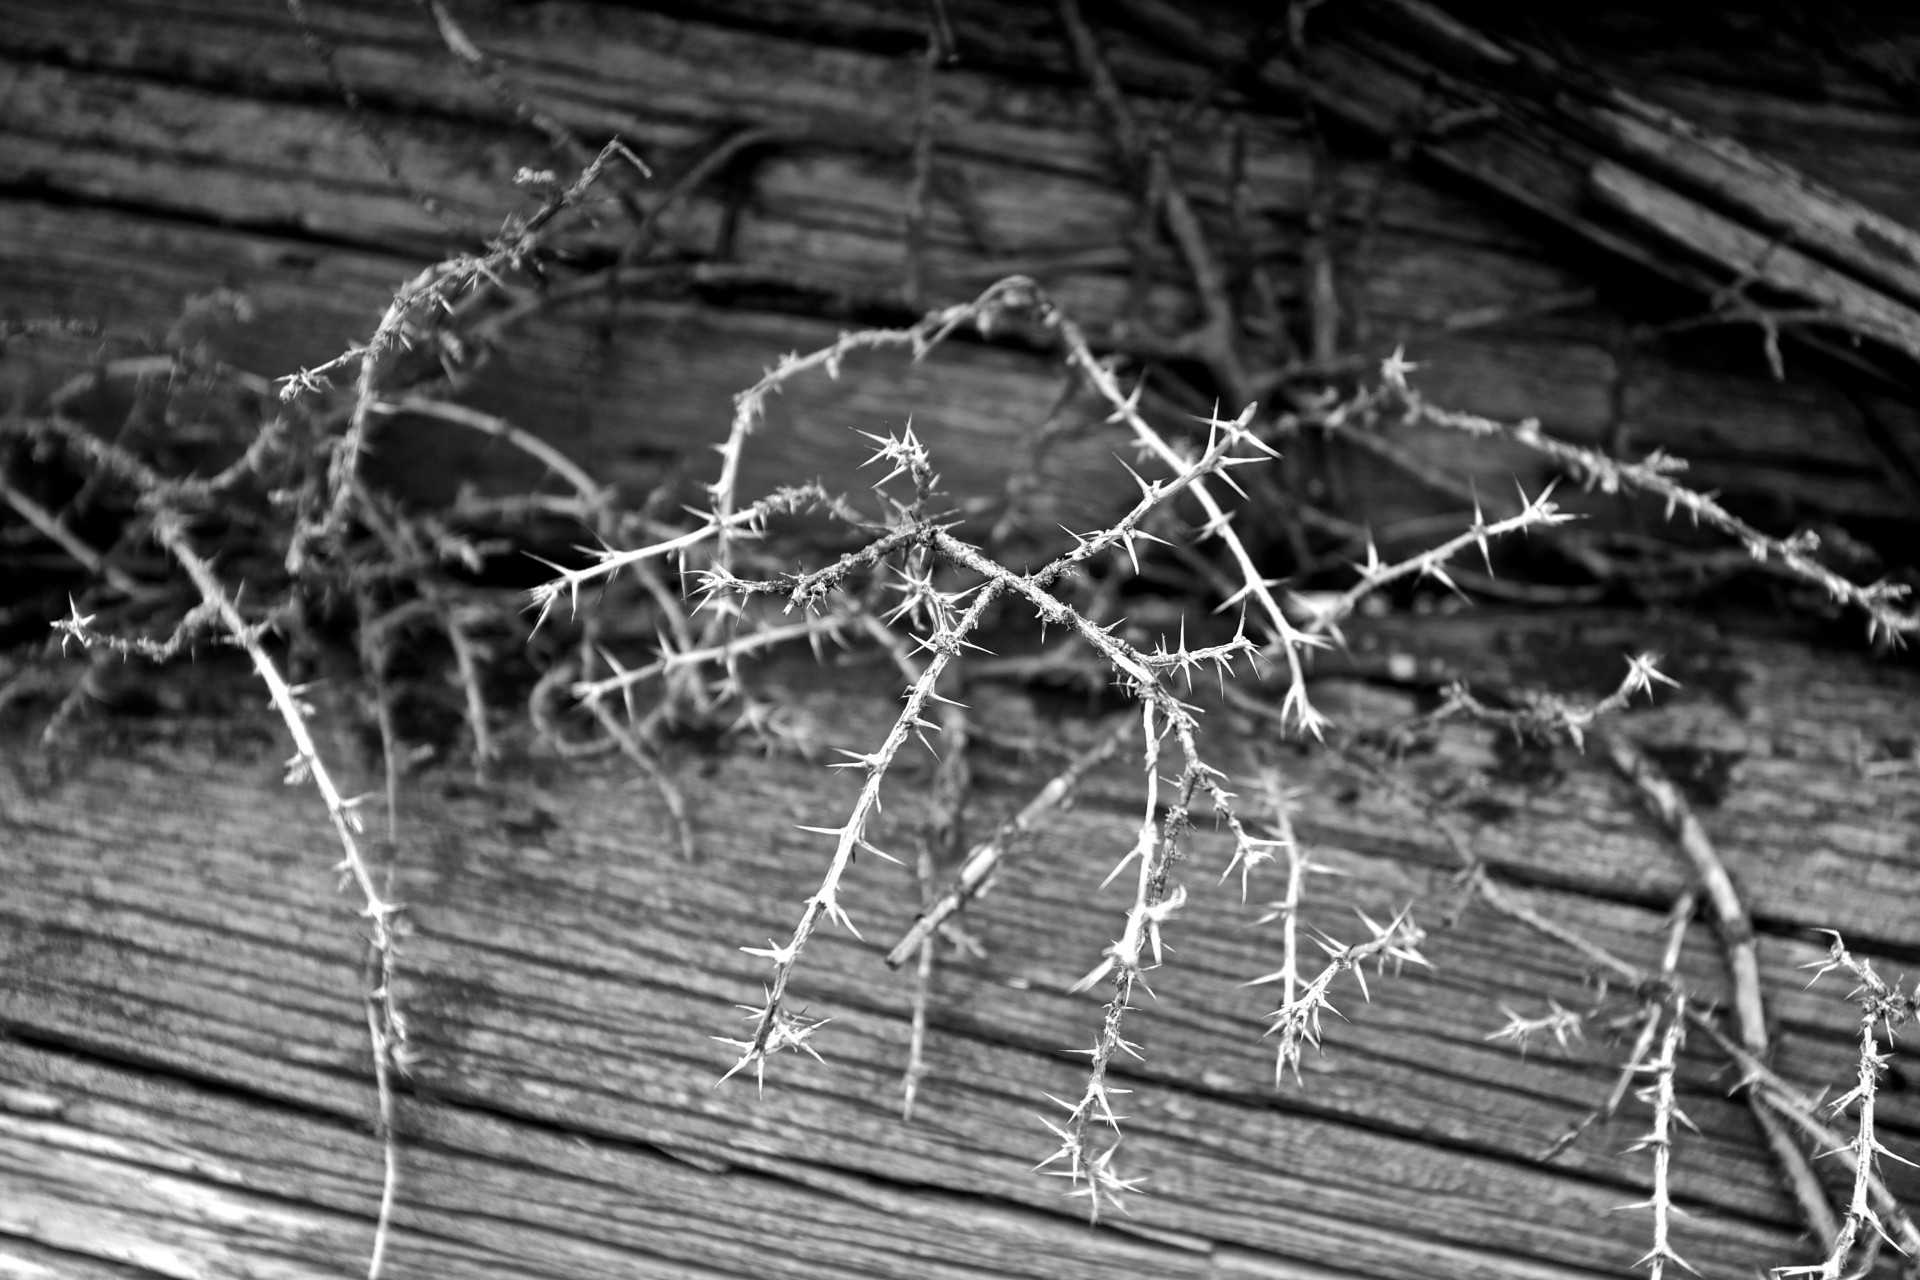 Cluster of white thorns grows out of the cracks of a forgotten wooden floor.